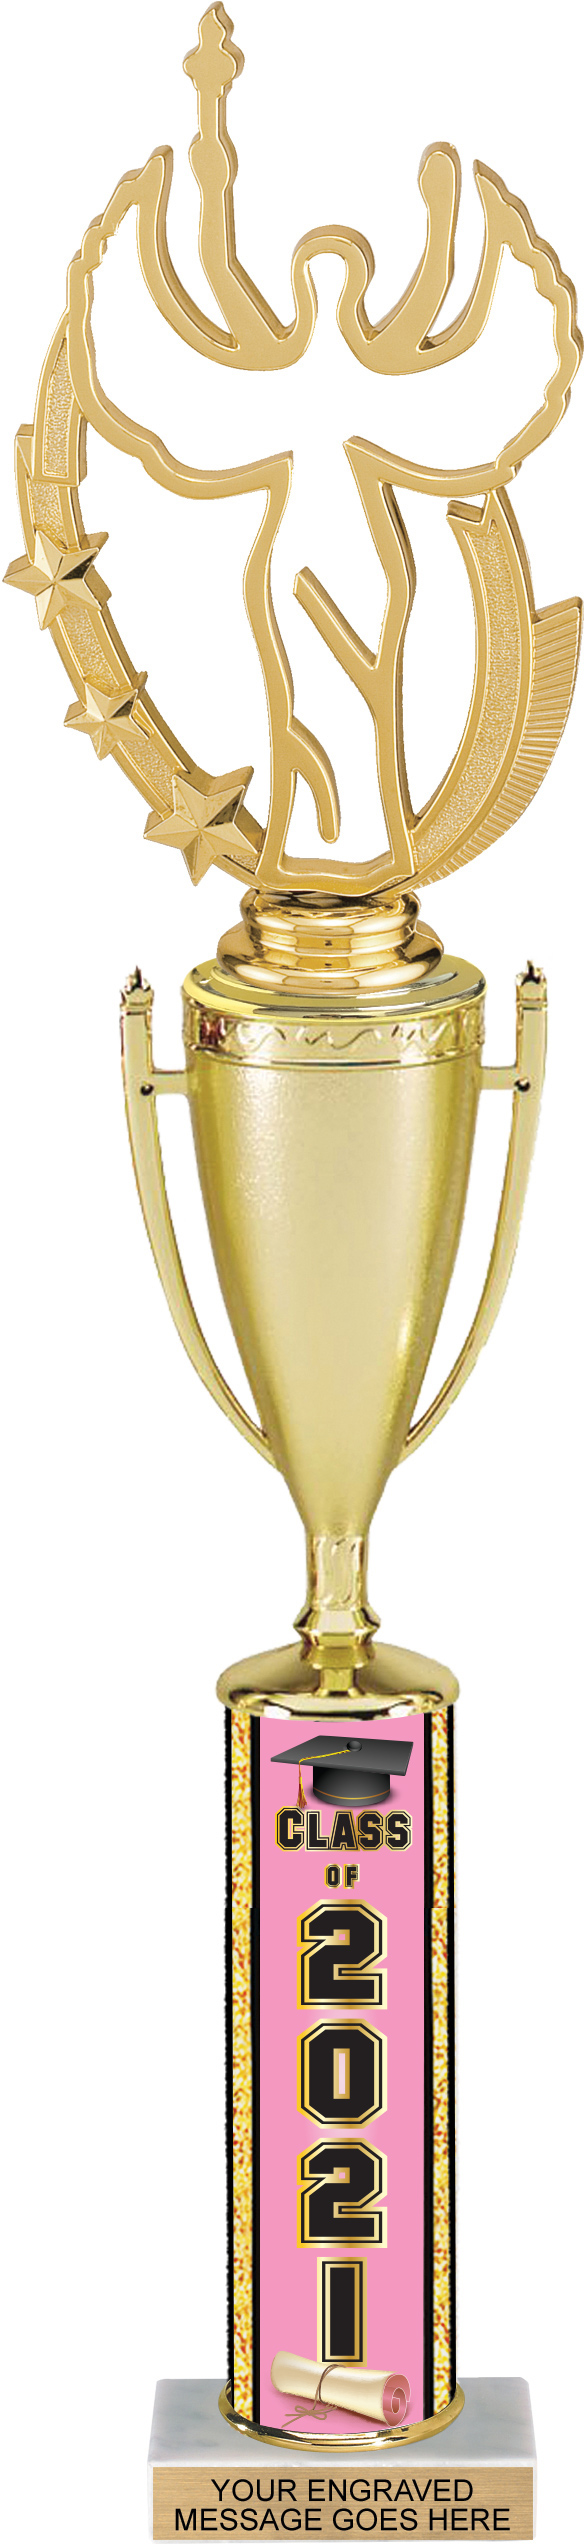 Class of 2021 Exclusive Column Cup Trophy - 17 inch